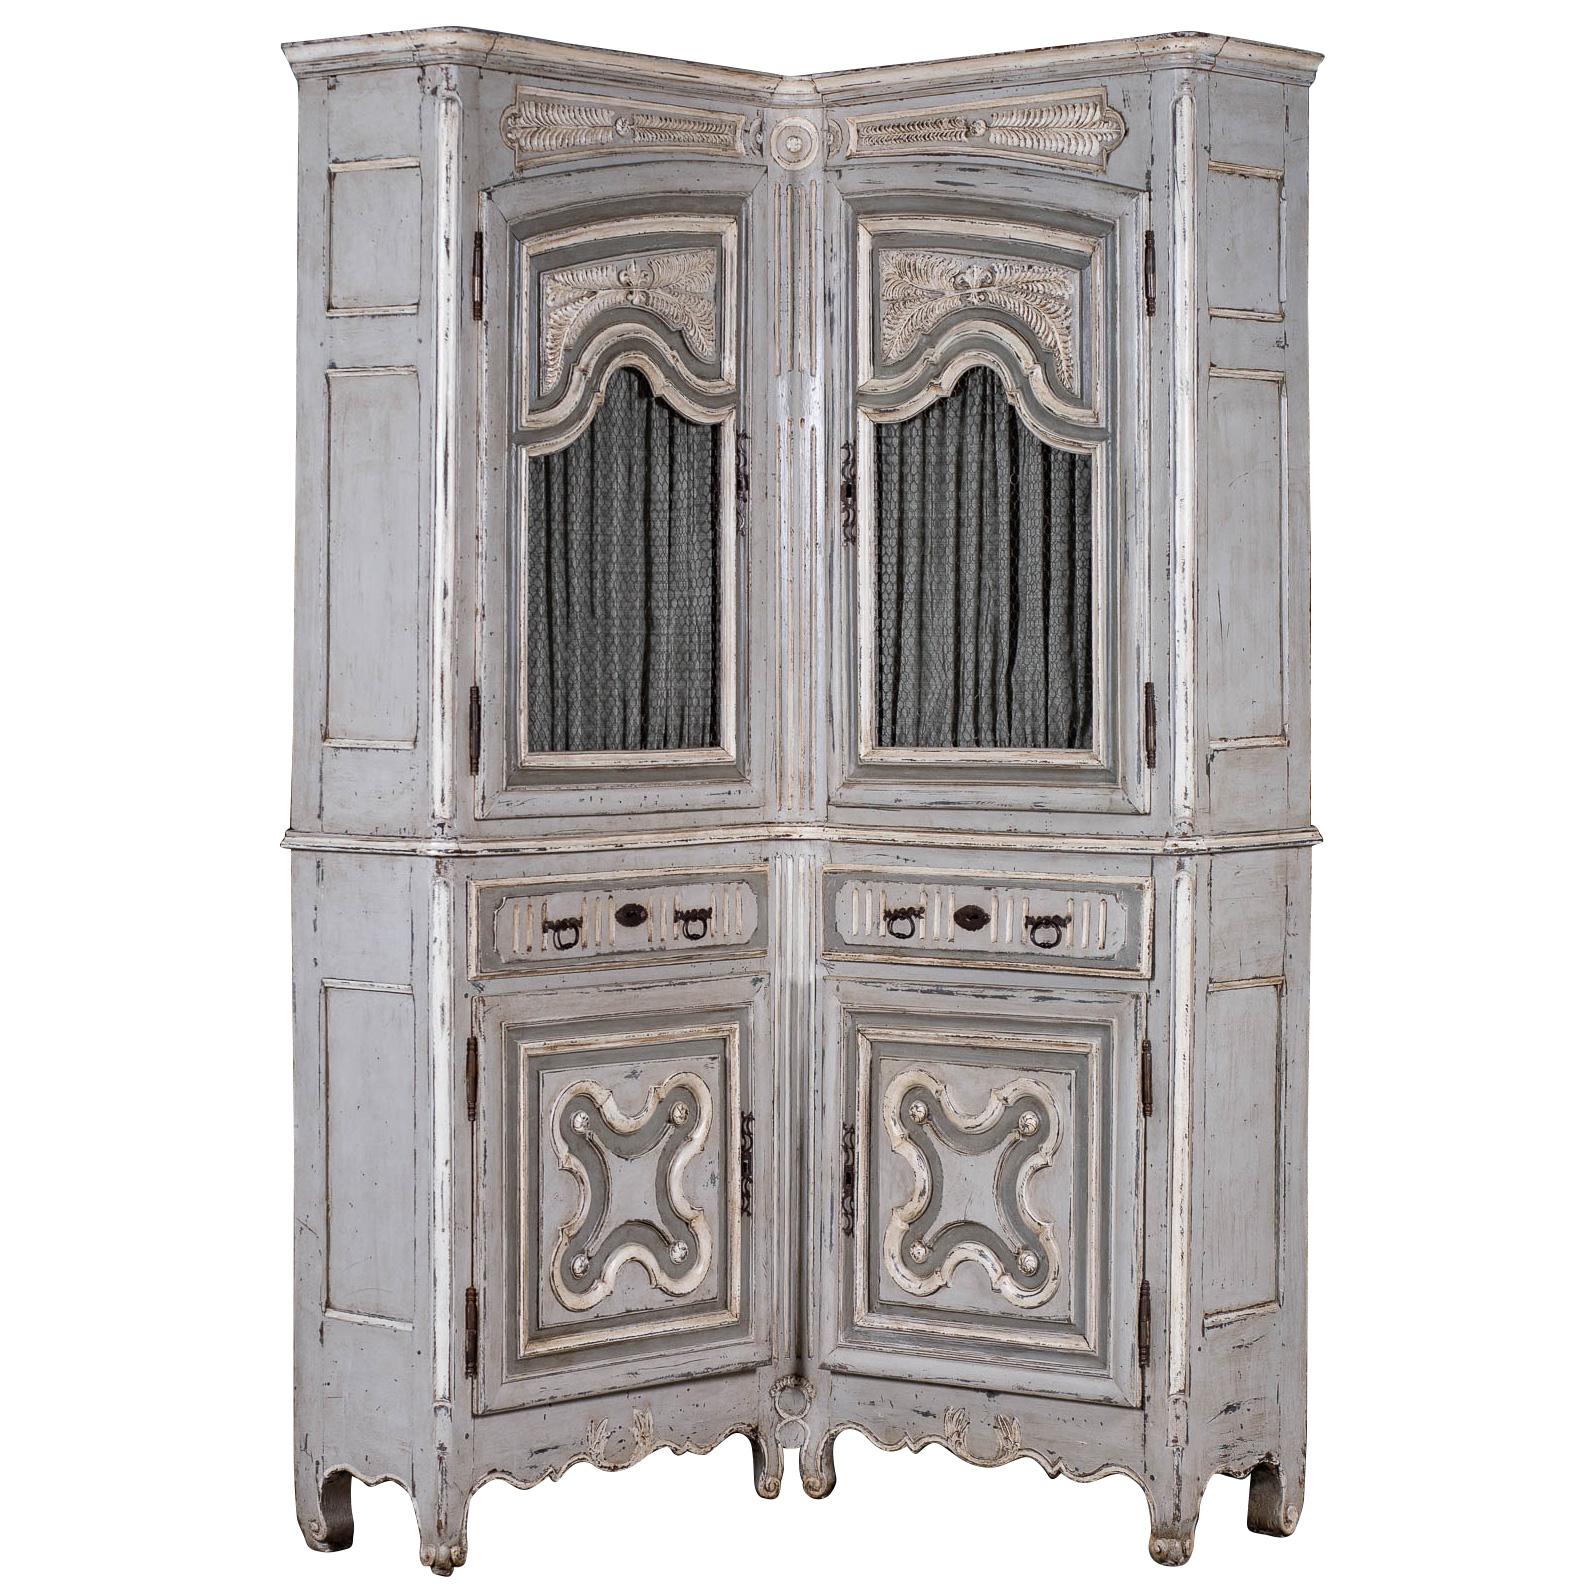 Antique French Louis XV Period Painted and Carved Corner Cabinet, circa 1740 For Sale